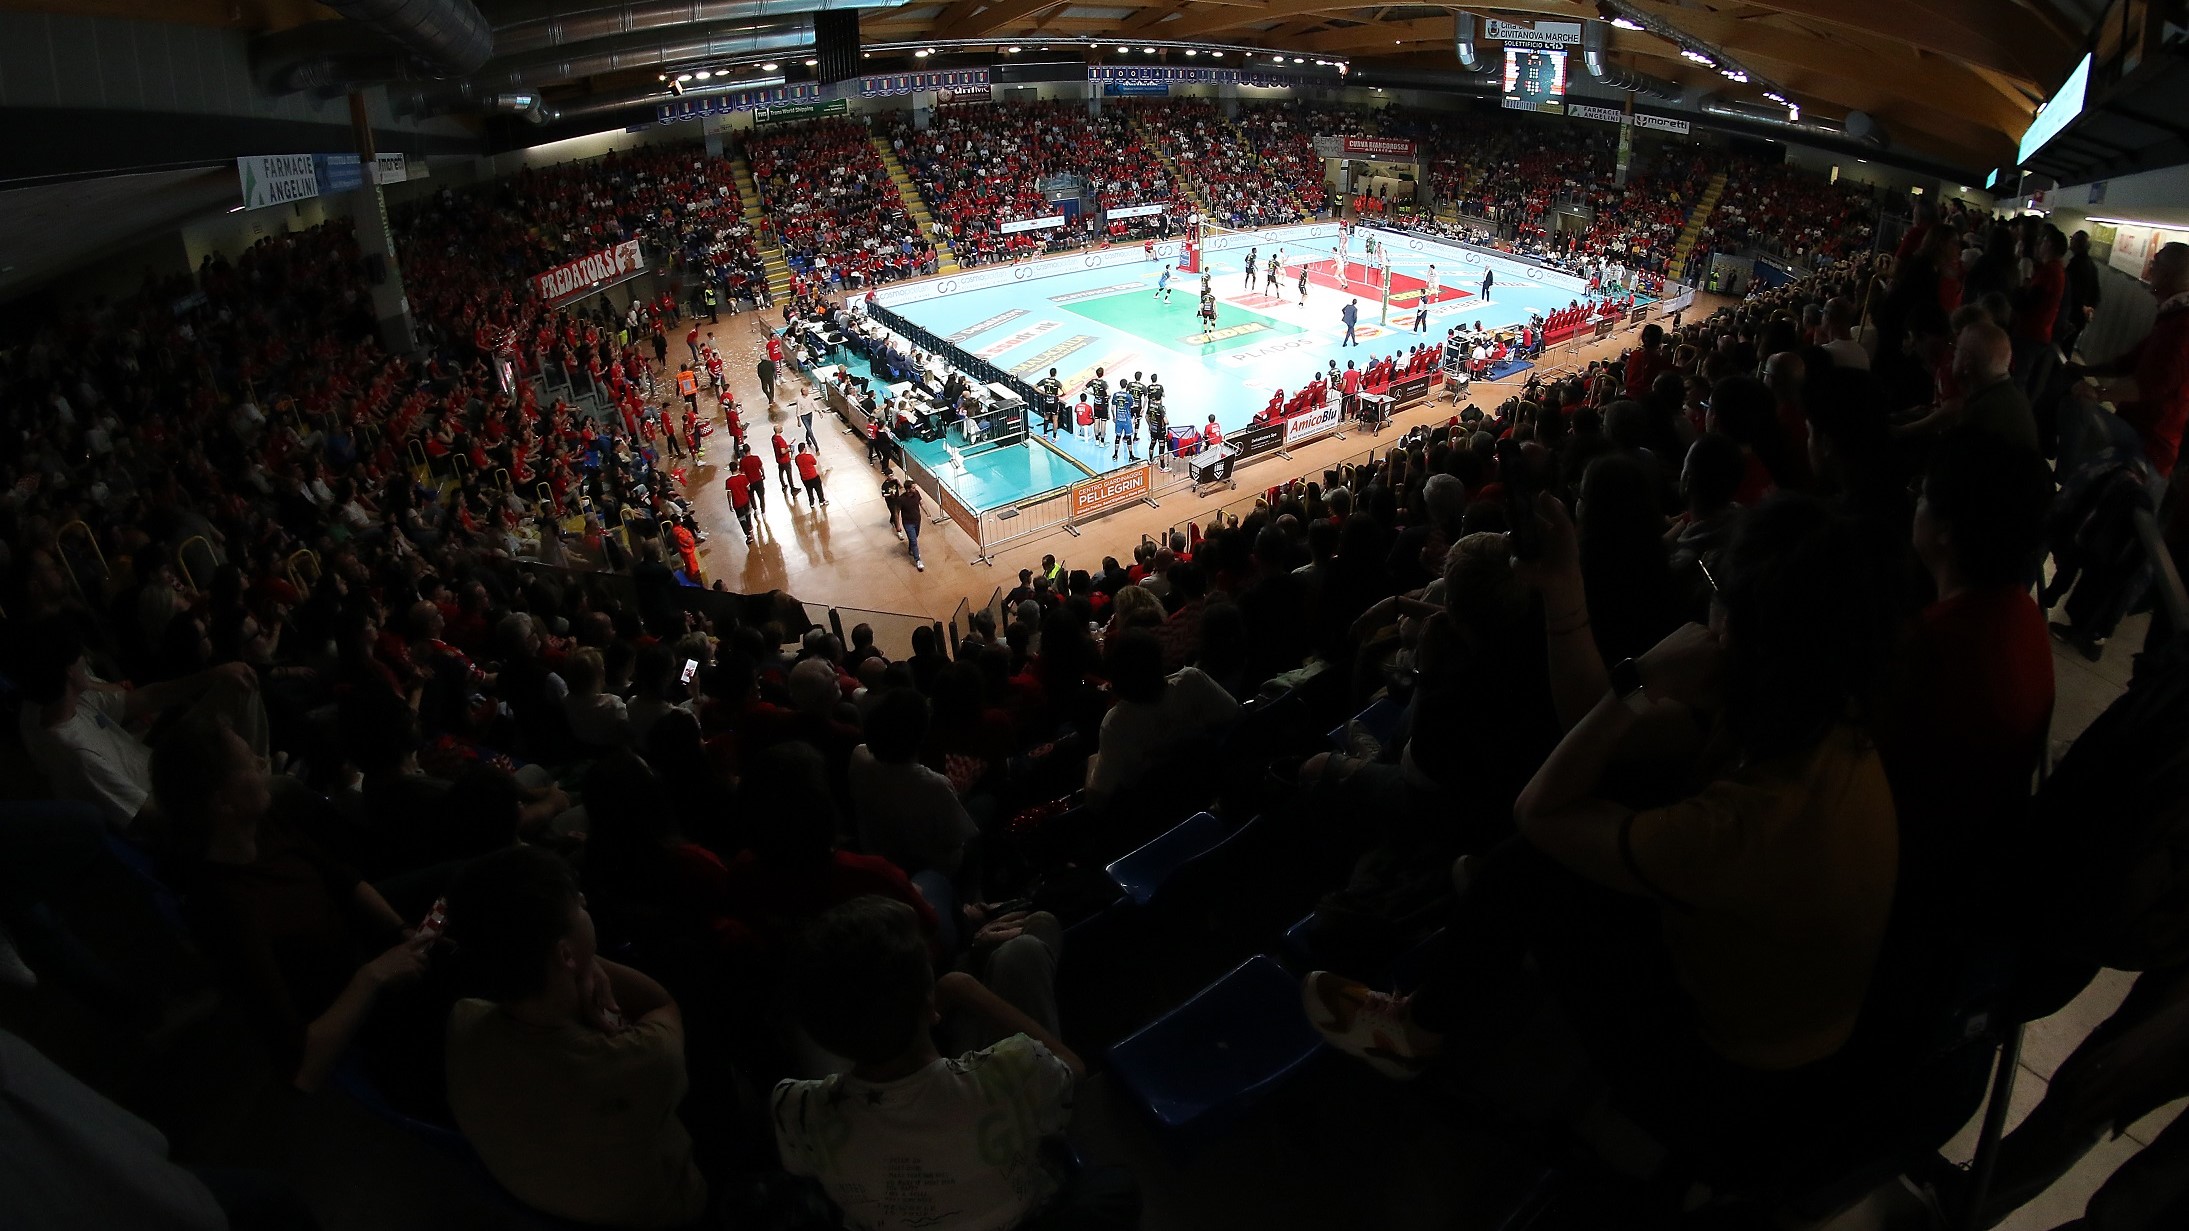 Another final for Lube Lega Pallavolo Serie A